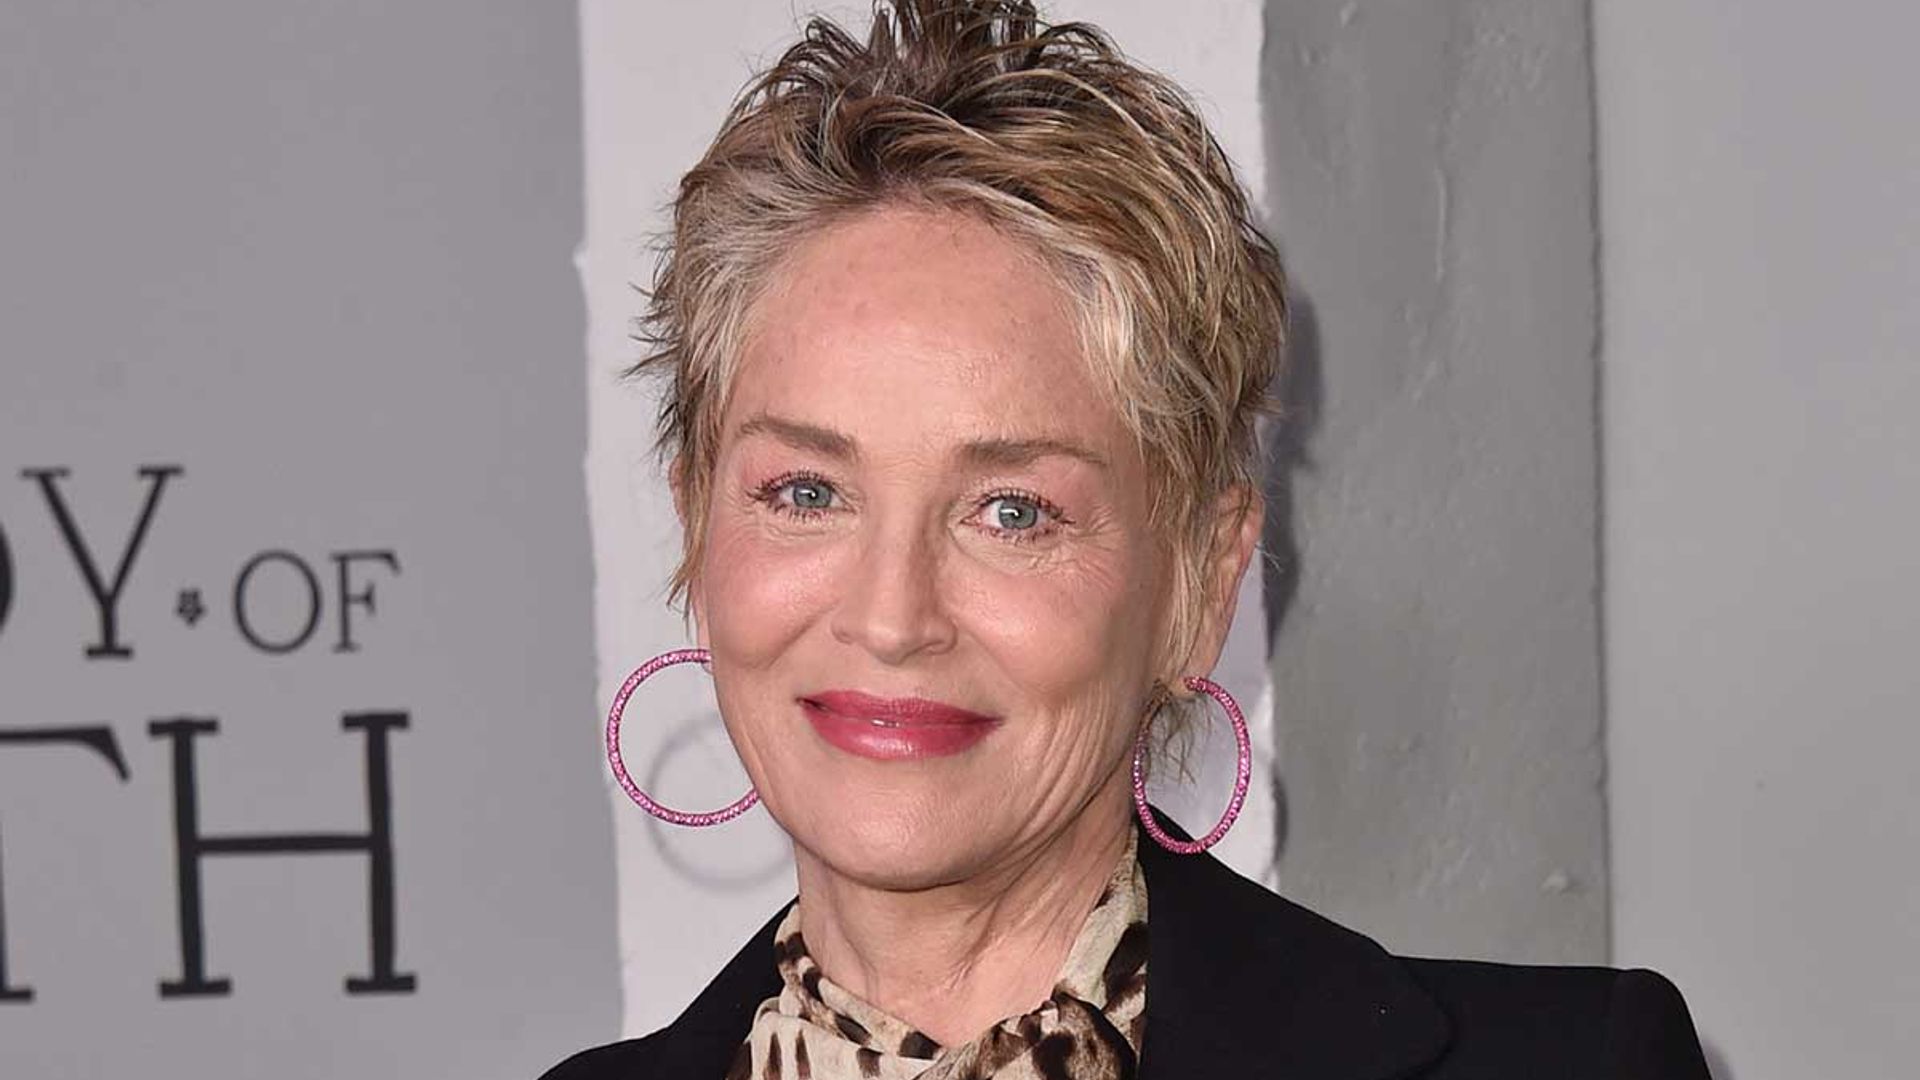 Sharon Stone commands attention in daring sheer dress